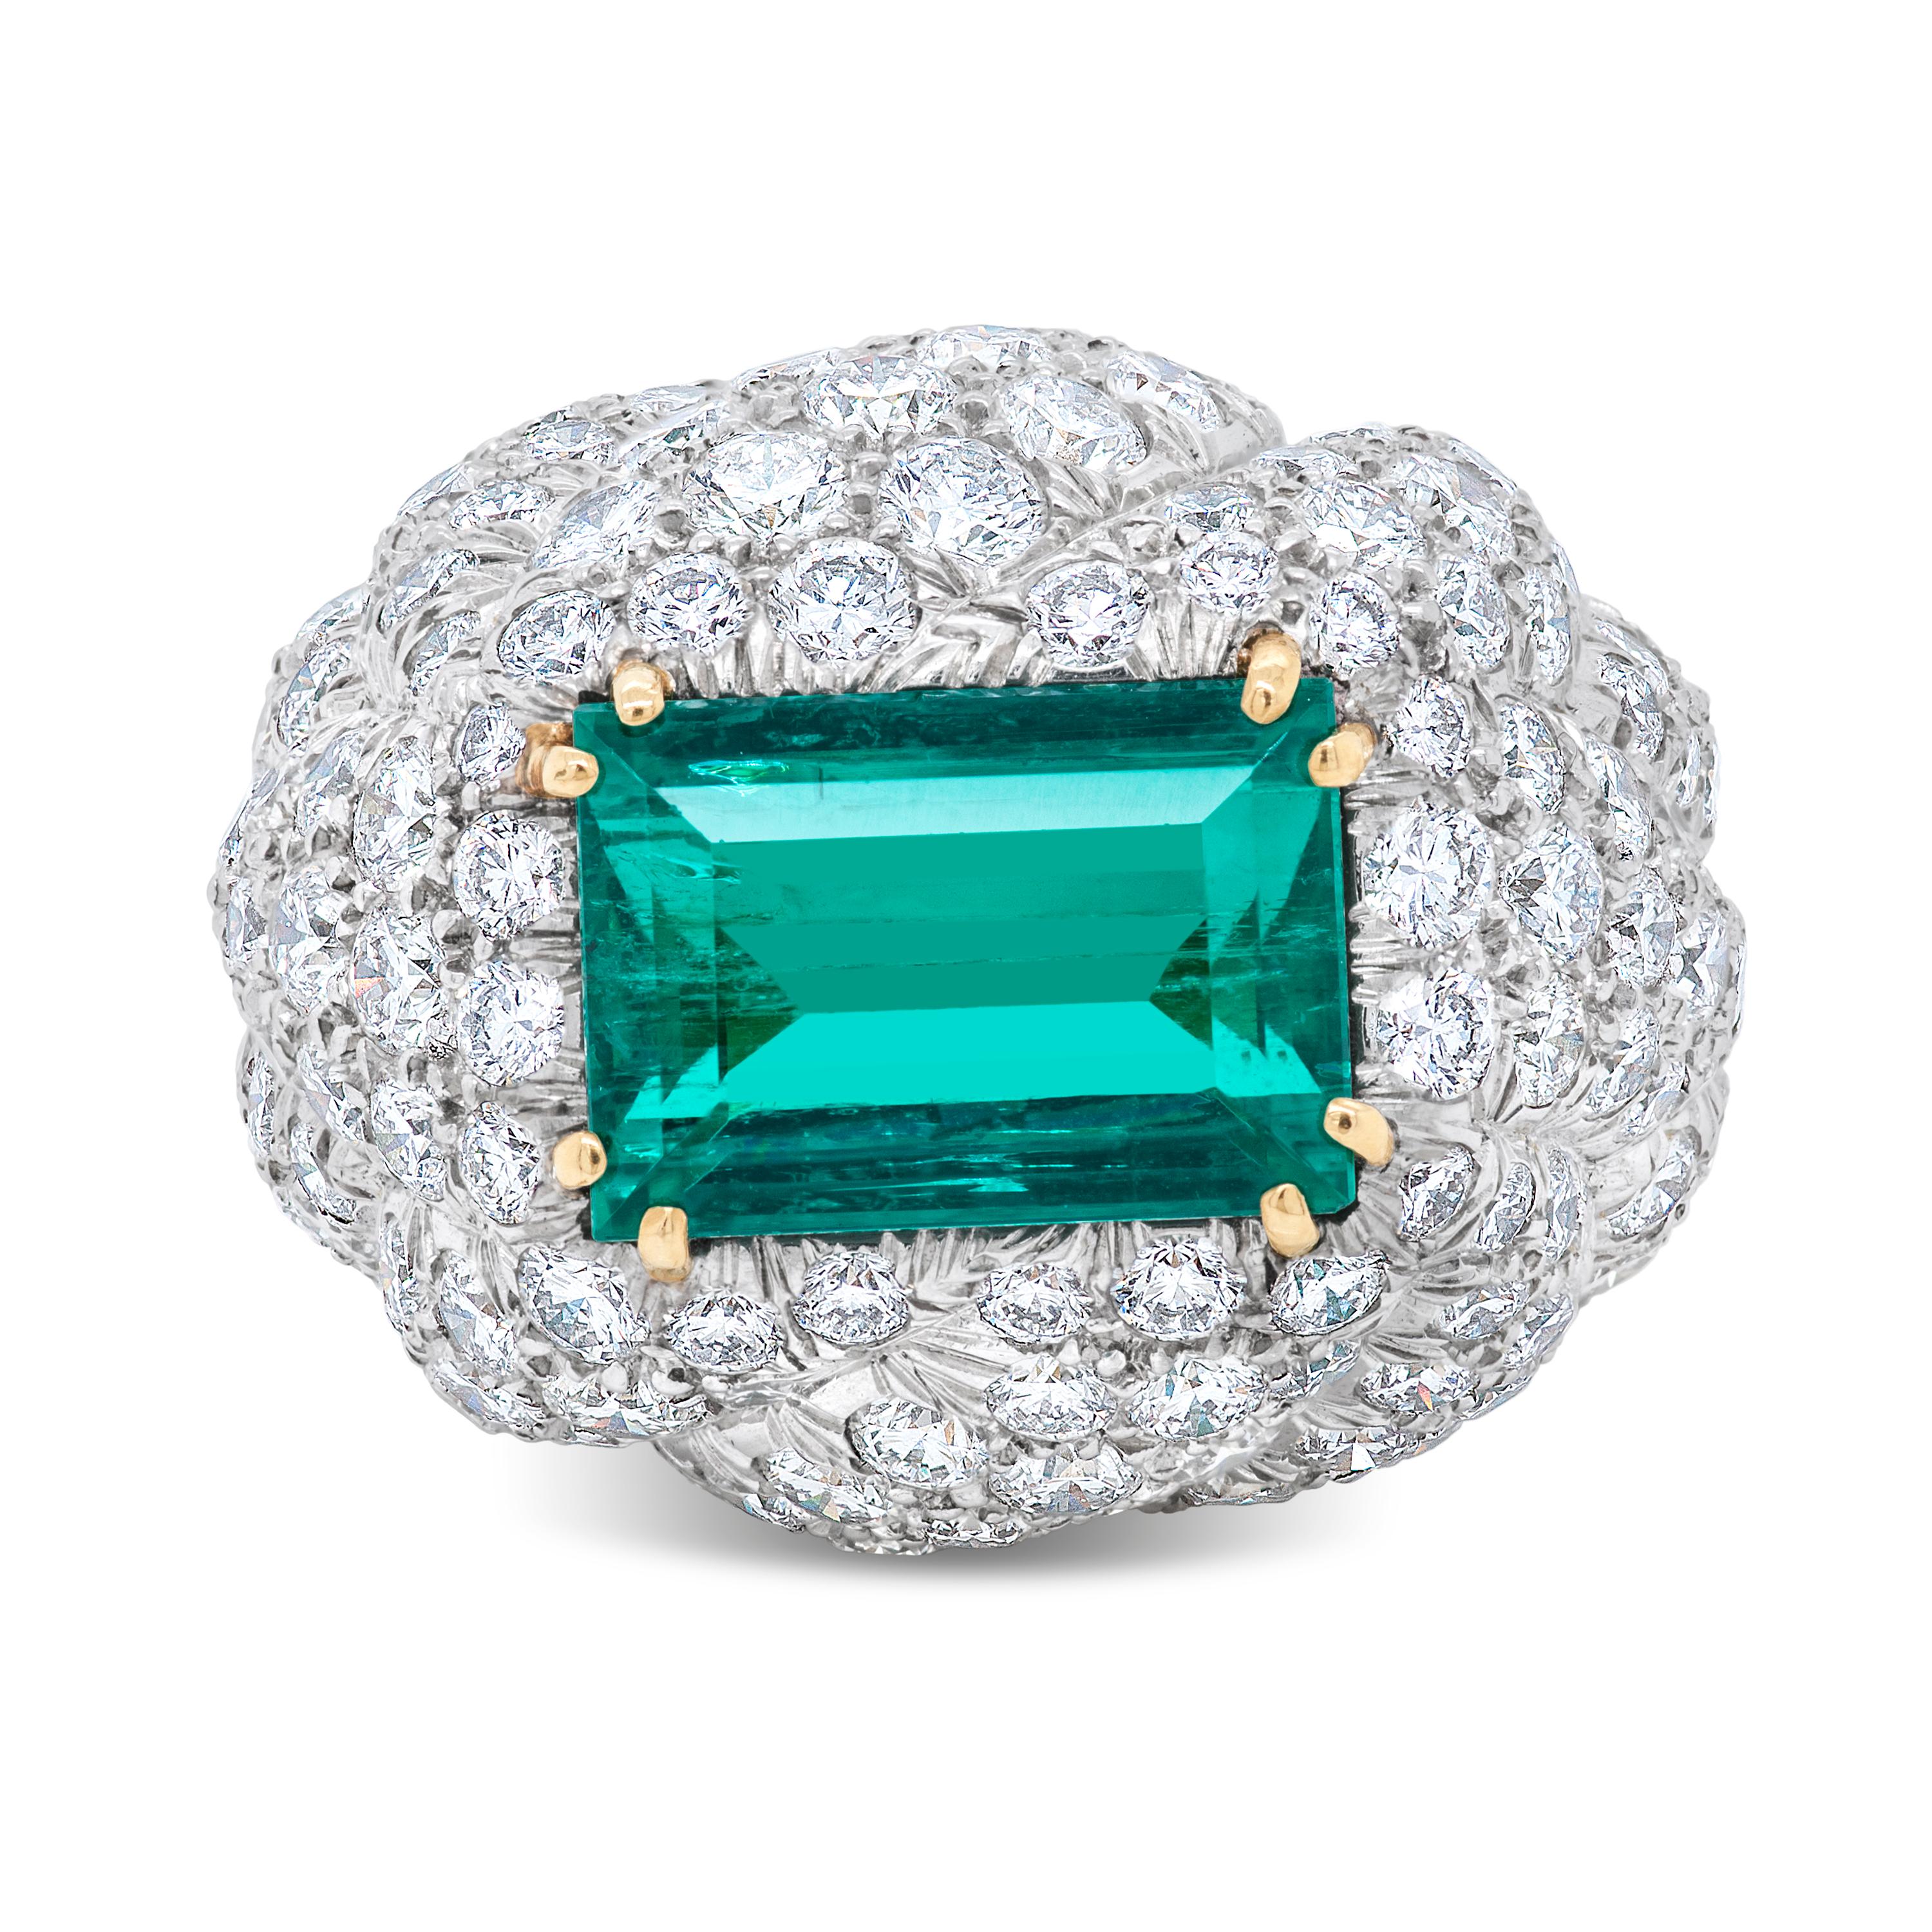 This David Webb ring features a 7.20 carat emerald cut Colombian emerald accompanied by an AGL report.  The emerald is surrounded by 160 round brilliant cut diamonds totaling approximately 7.33 carat with F color and VS clarity, pave set in